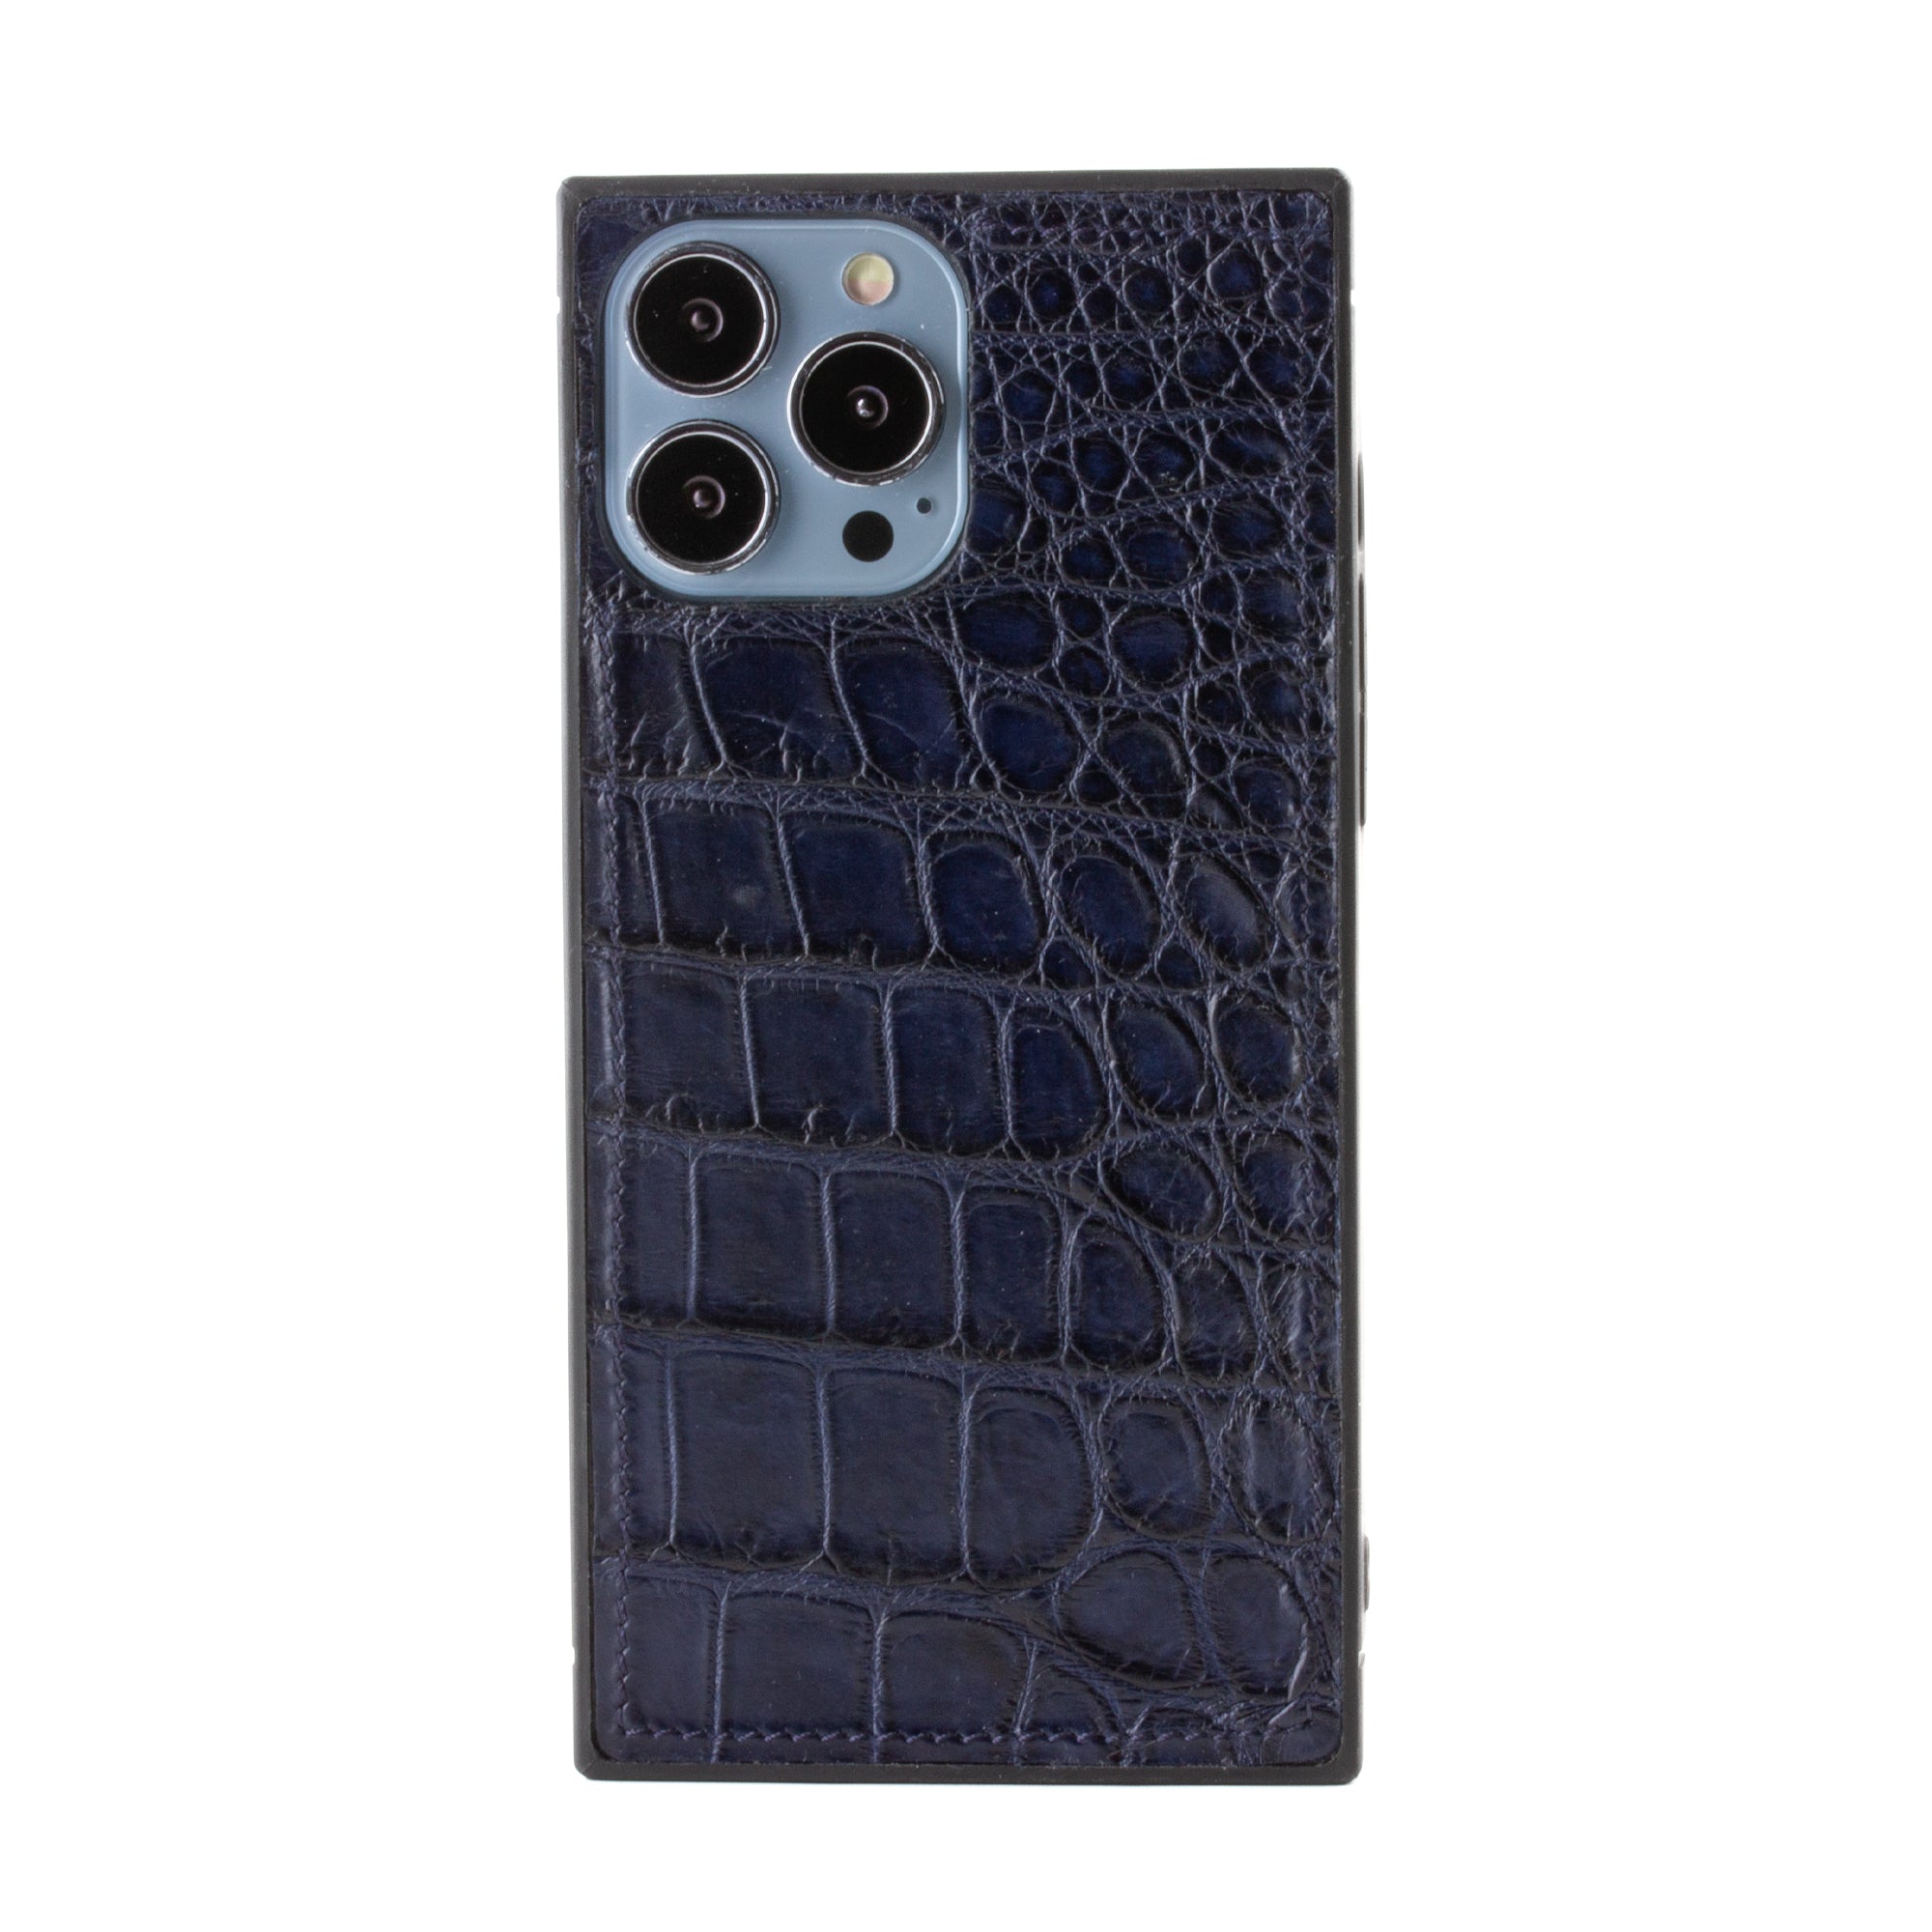 Clearance Sale - Leather iPhone "Square Case" - iPhone 13 Pro Max - Navy blue alligator